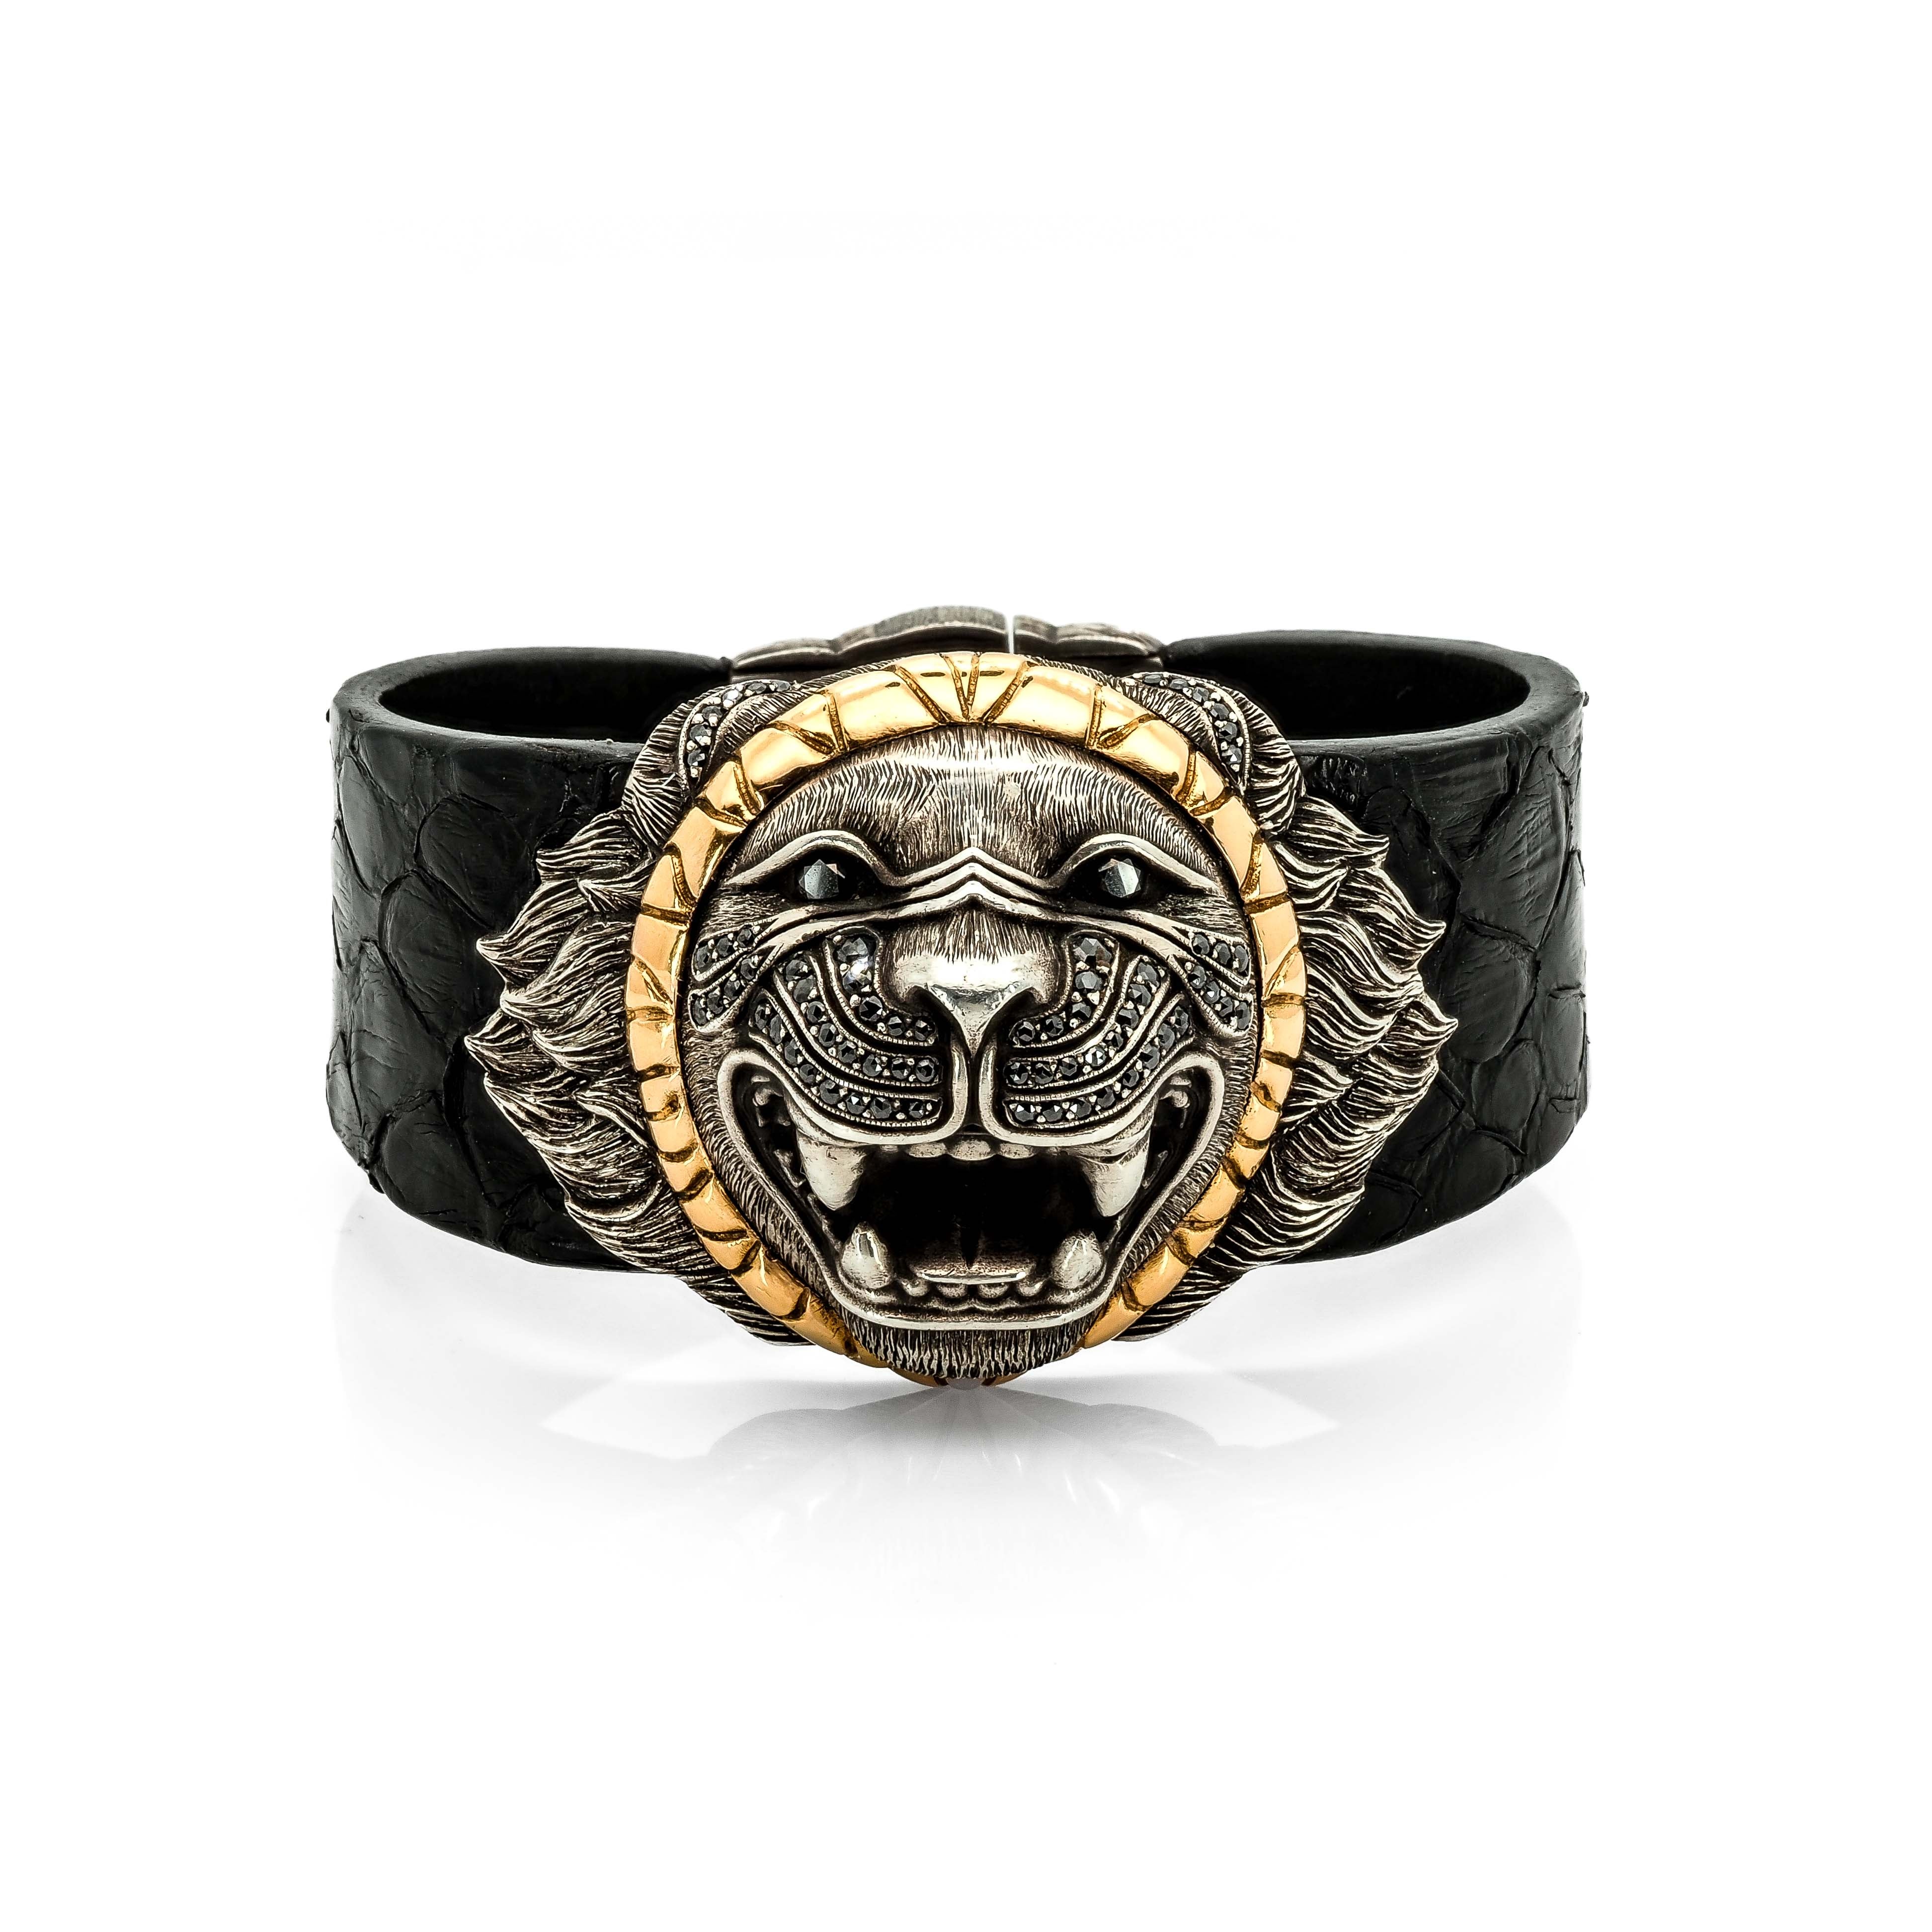 Taru Jewelry luxurious lion bracelet is crafted from 18K gold, sterling silver, and features black diamonds. The lion's face is hand-engraved to capture the intricate details of its fur, and the mane is further accentuated in the clasp with colorful natural diamonds. The bracelet is finished with a black snake leather band, adding a touch of elegance to the piece.